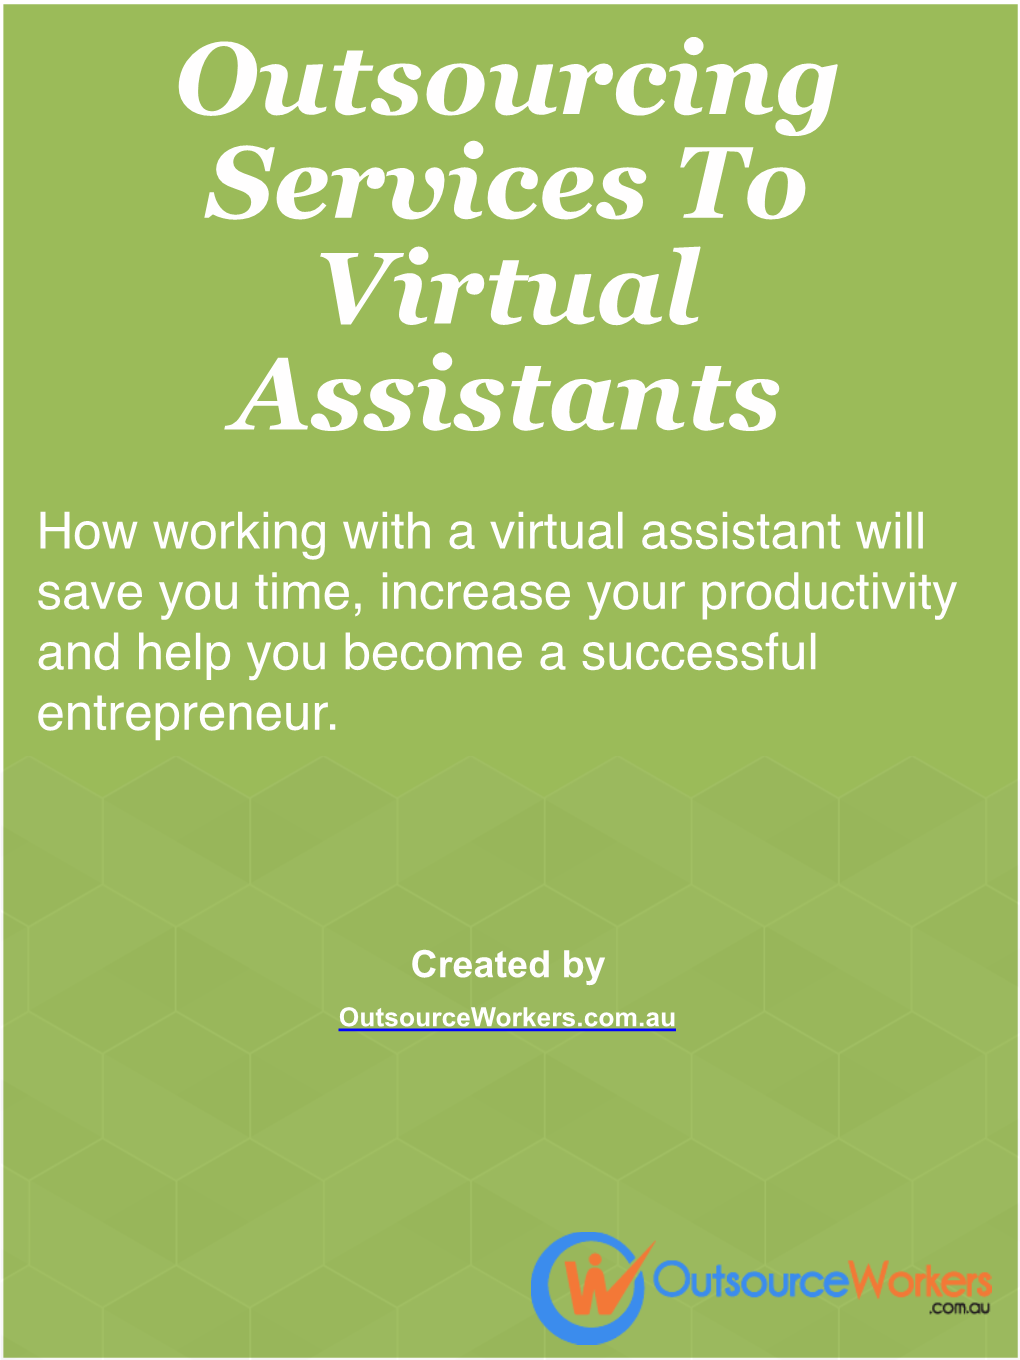 Outsourcing Services to Virtual Assistants